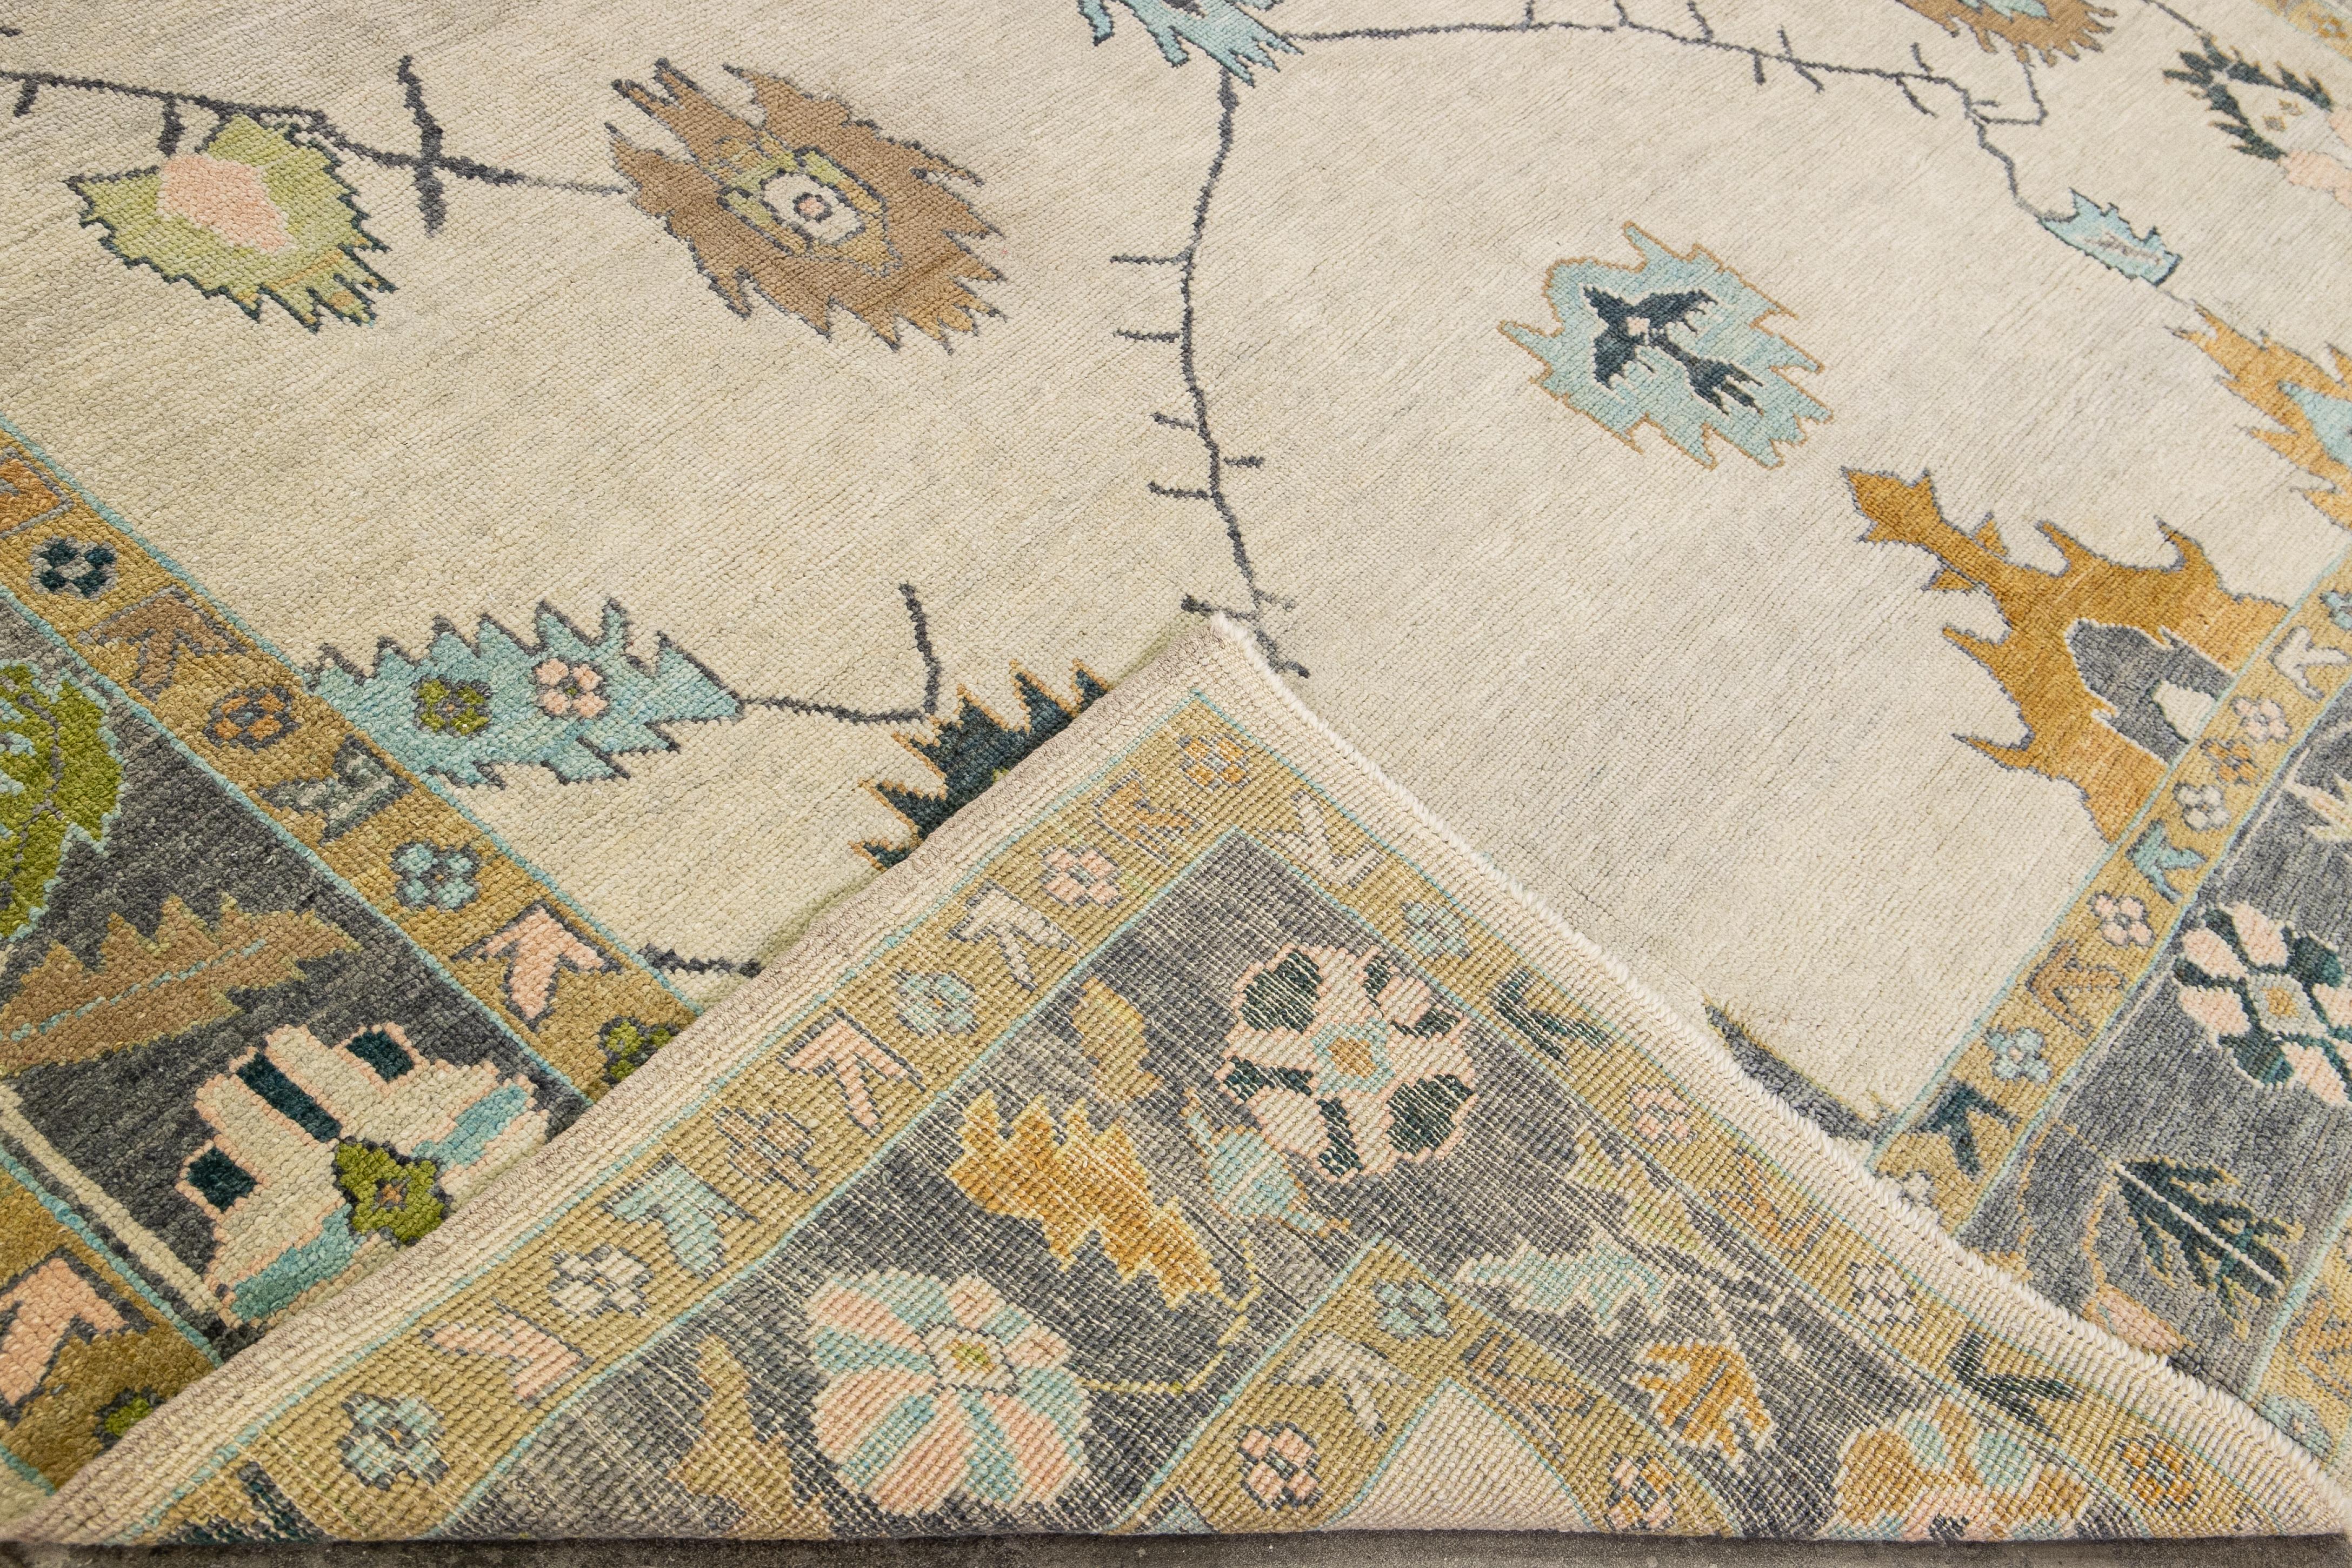 Beautiful modern Oushak hand-knotted wool rug with a beige field. This Oushak rug has a gray frame and multi-color accents all over a gorgeous geometric floral design.

This rug measures 9'10